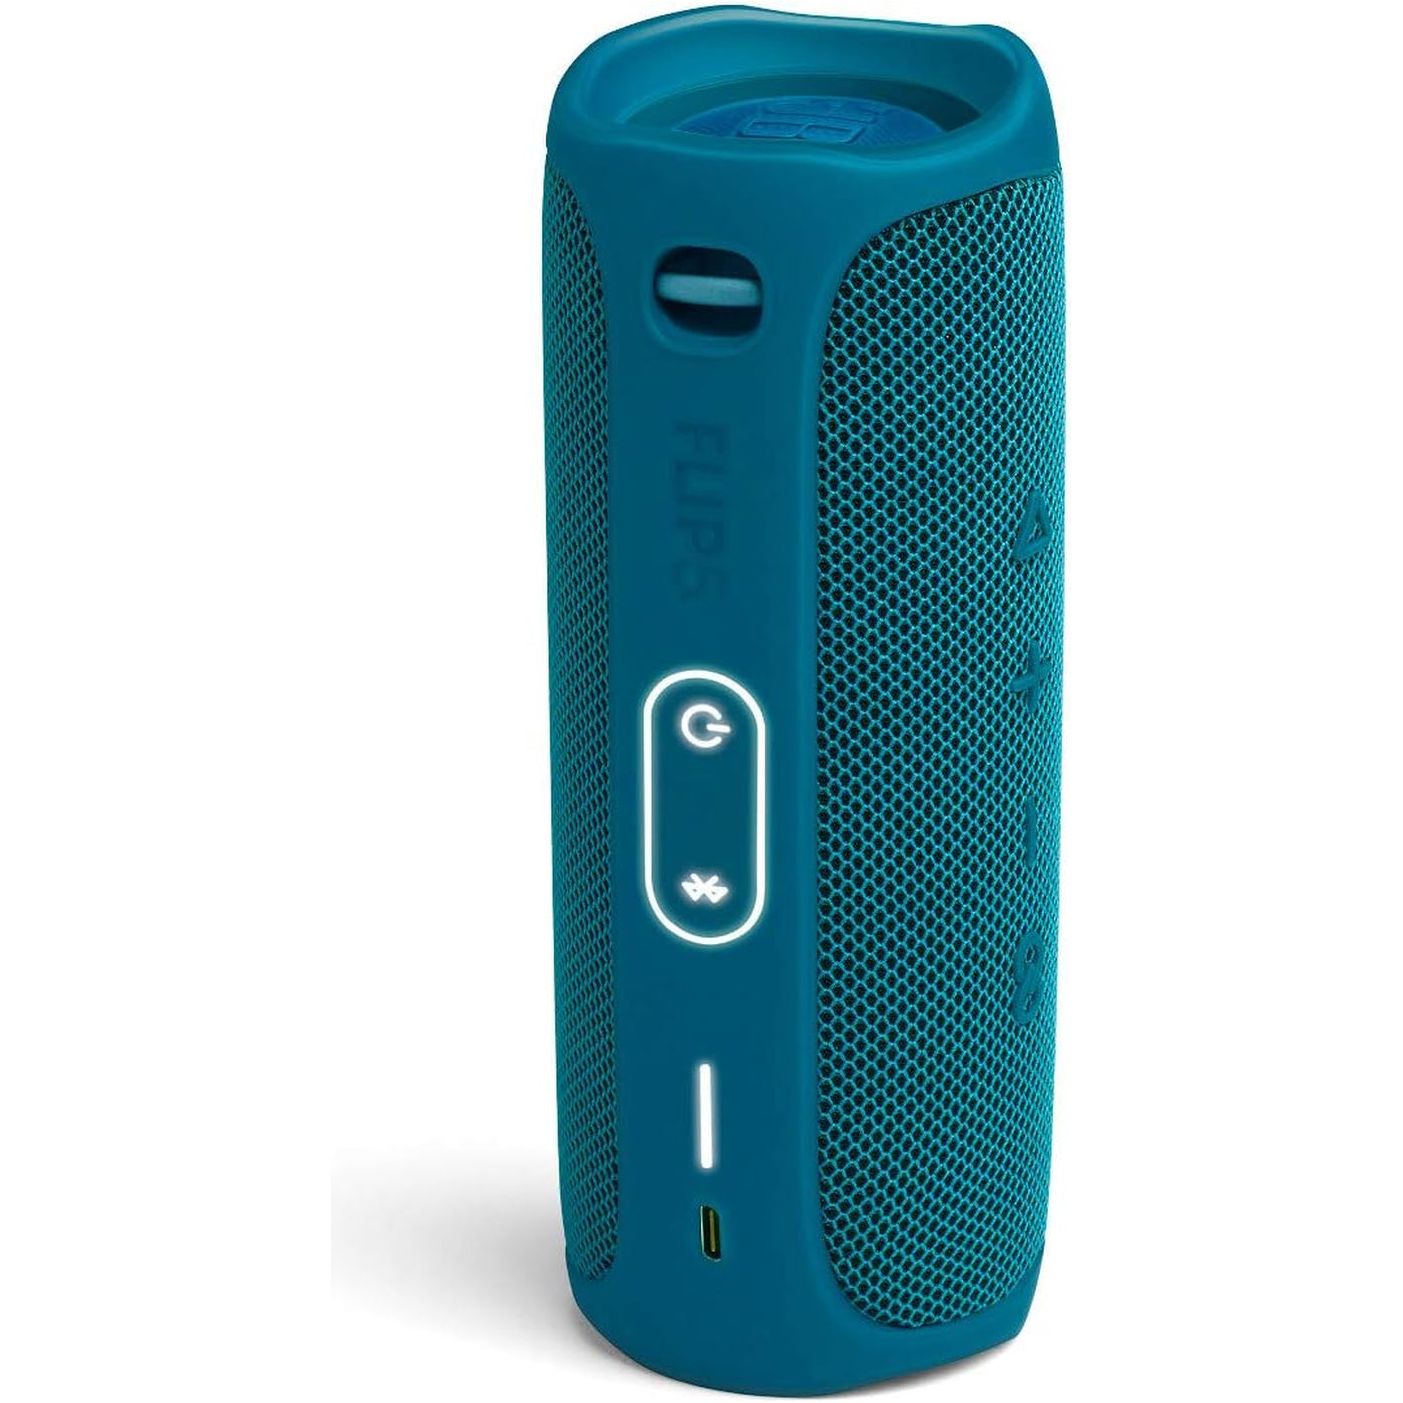 FLIP 5 - Waterproof Portable Bluetooth Speaker Made from 100% Recycled Plastic - Blue